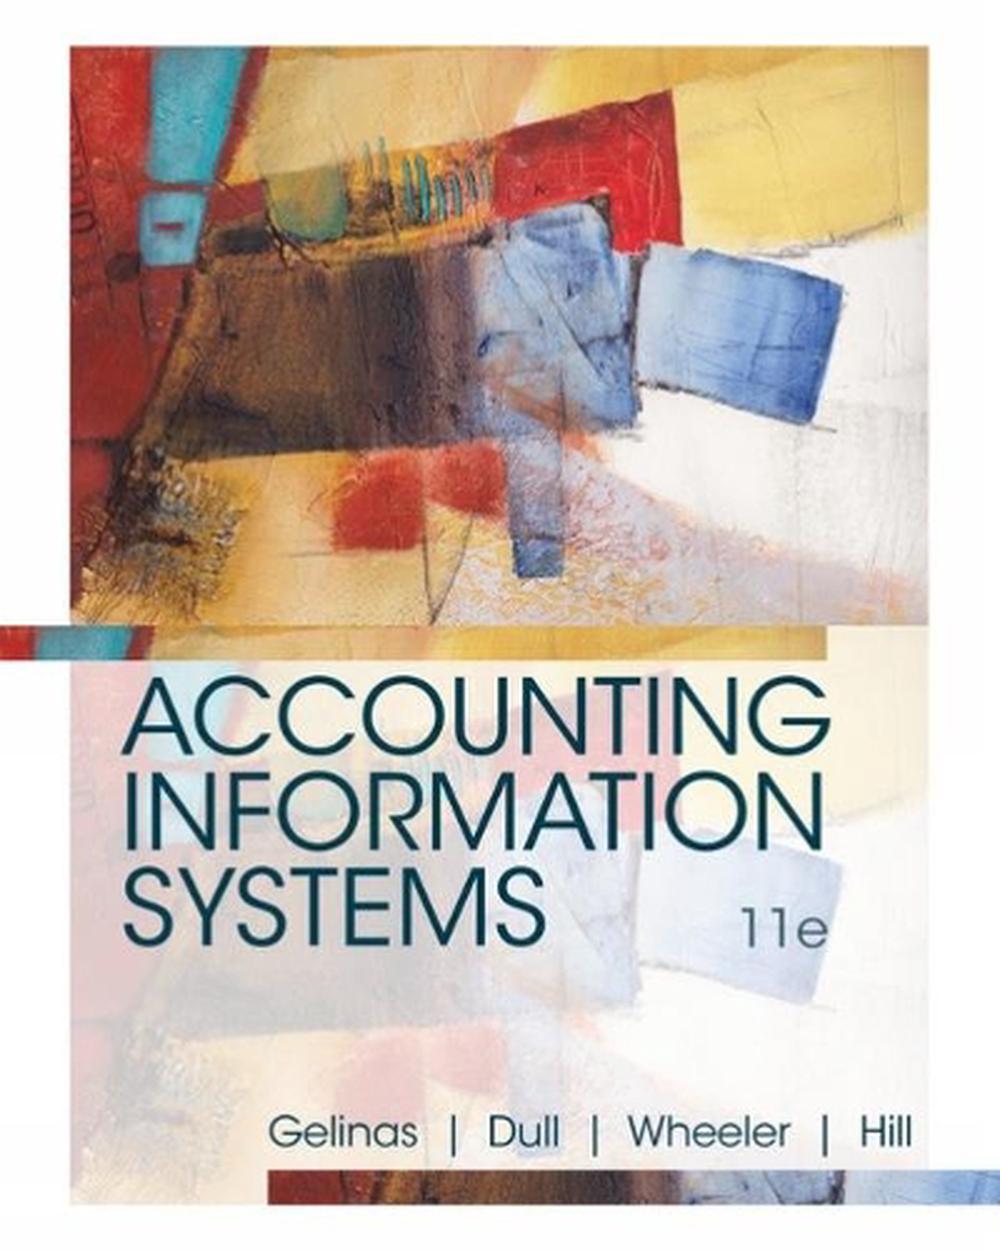 accounting information systems 10th edition pdf free download